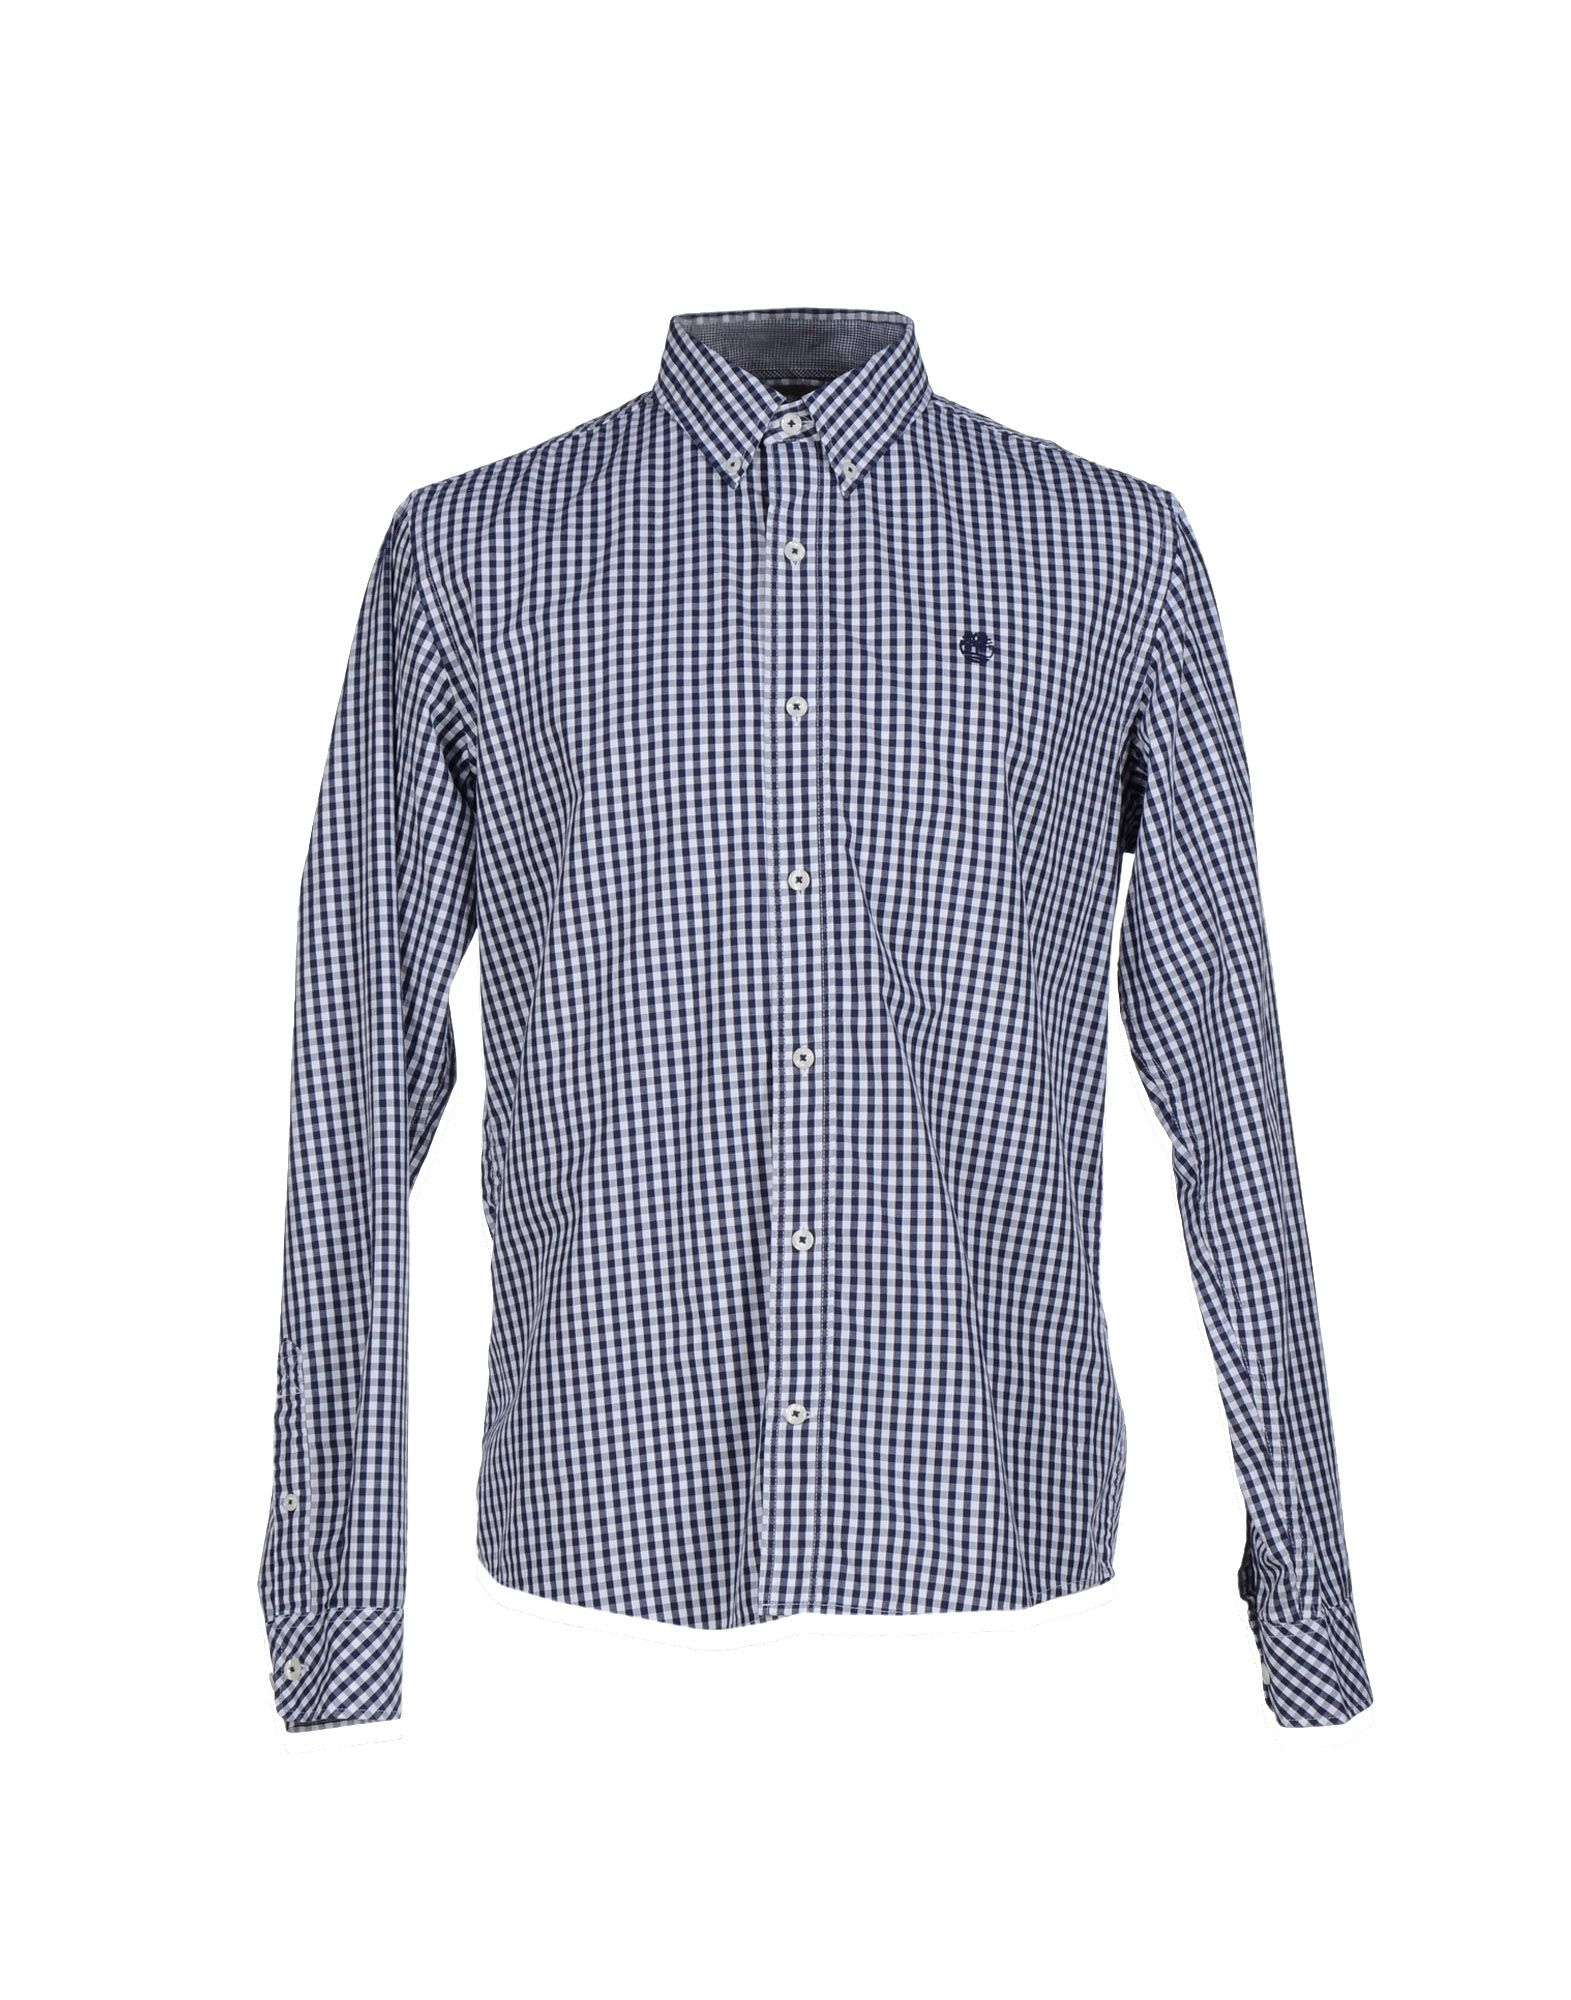 Lyst - Timberland Shirt in Blue for Men